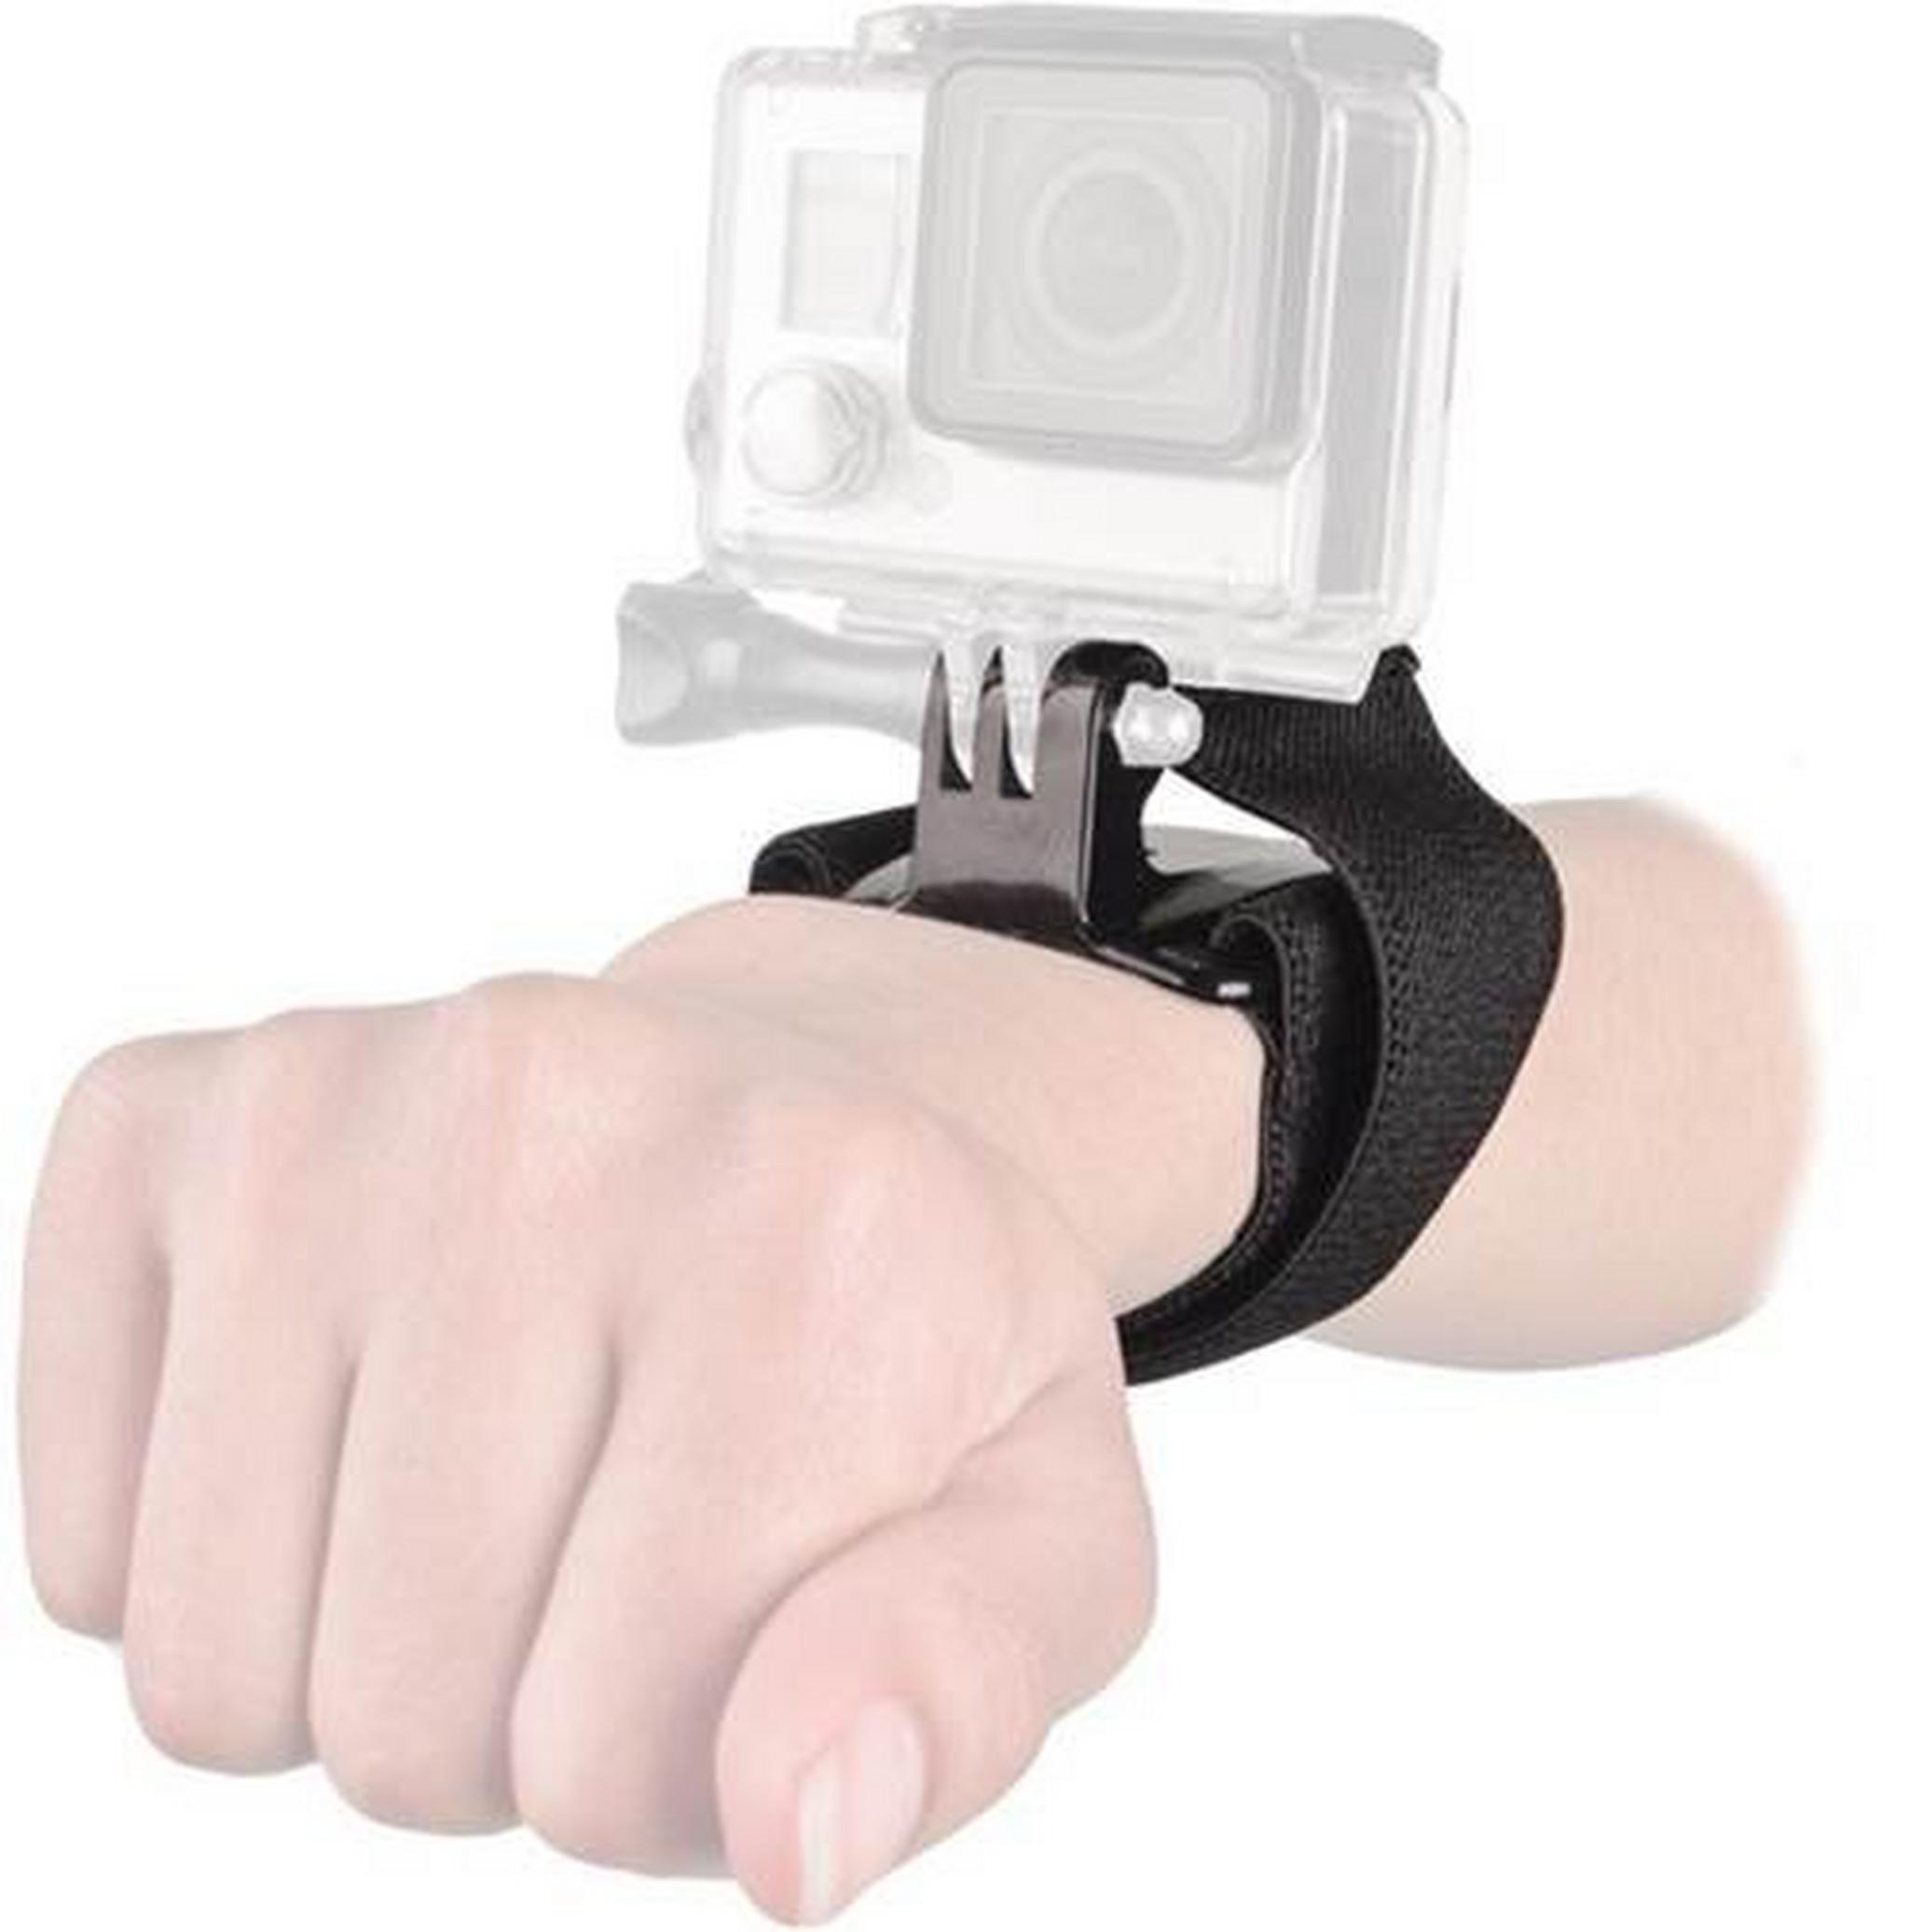 Bower Xtreme Action Series Velcro Wrist Strap for GoPro - Black